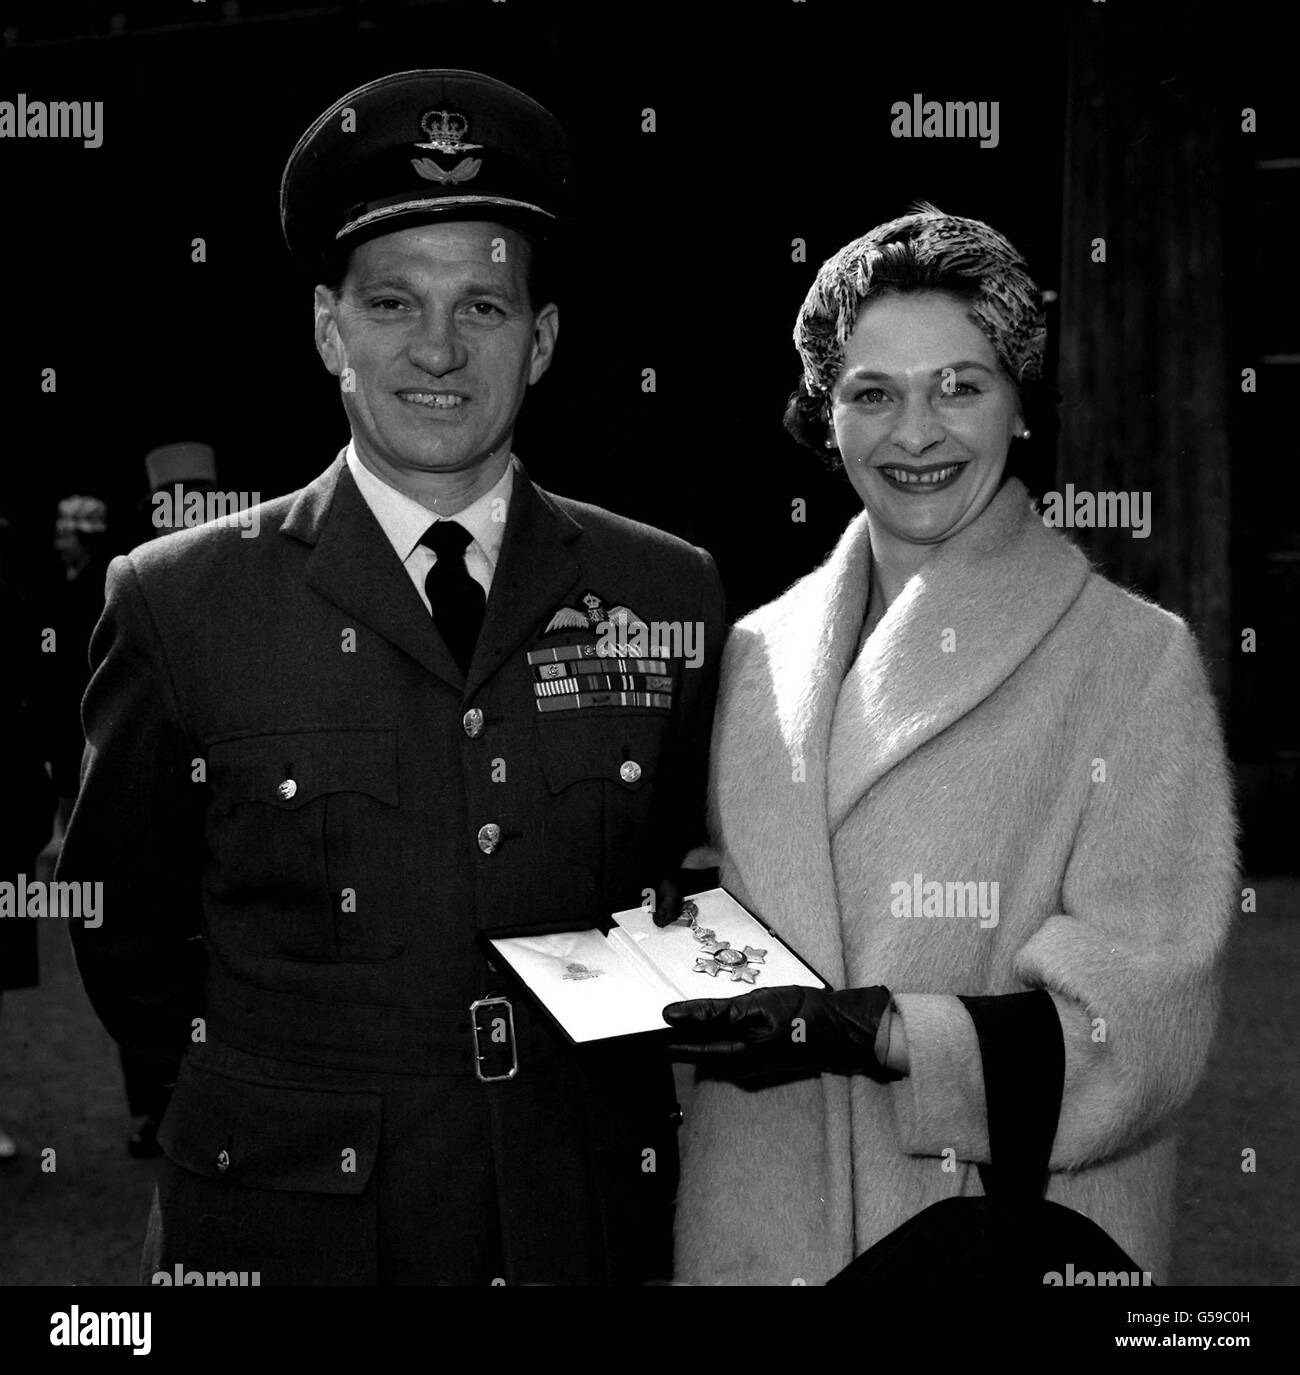 1960: Group Captain James 'Johnnie' Johnson, the fighter ace of Second World War fame, with his wife, Paula, outside Buckingham Palace, London, after being made a Commander, Military Division, of the Order of the British Empire. The Queen Mother held the investiture on behalf of the Queen. Stock Photo